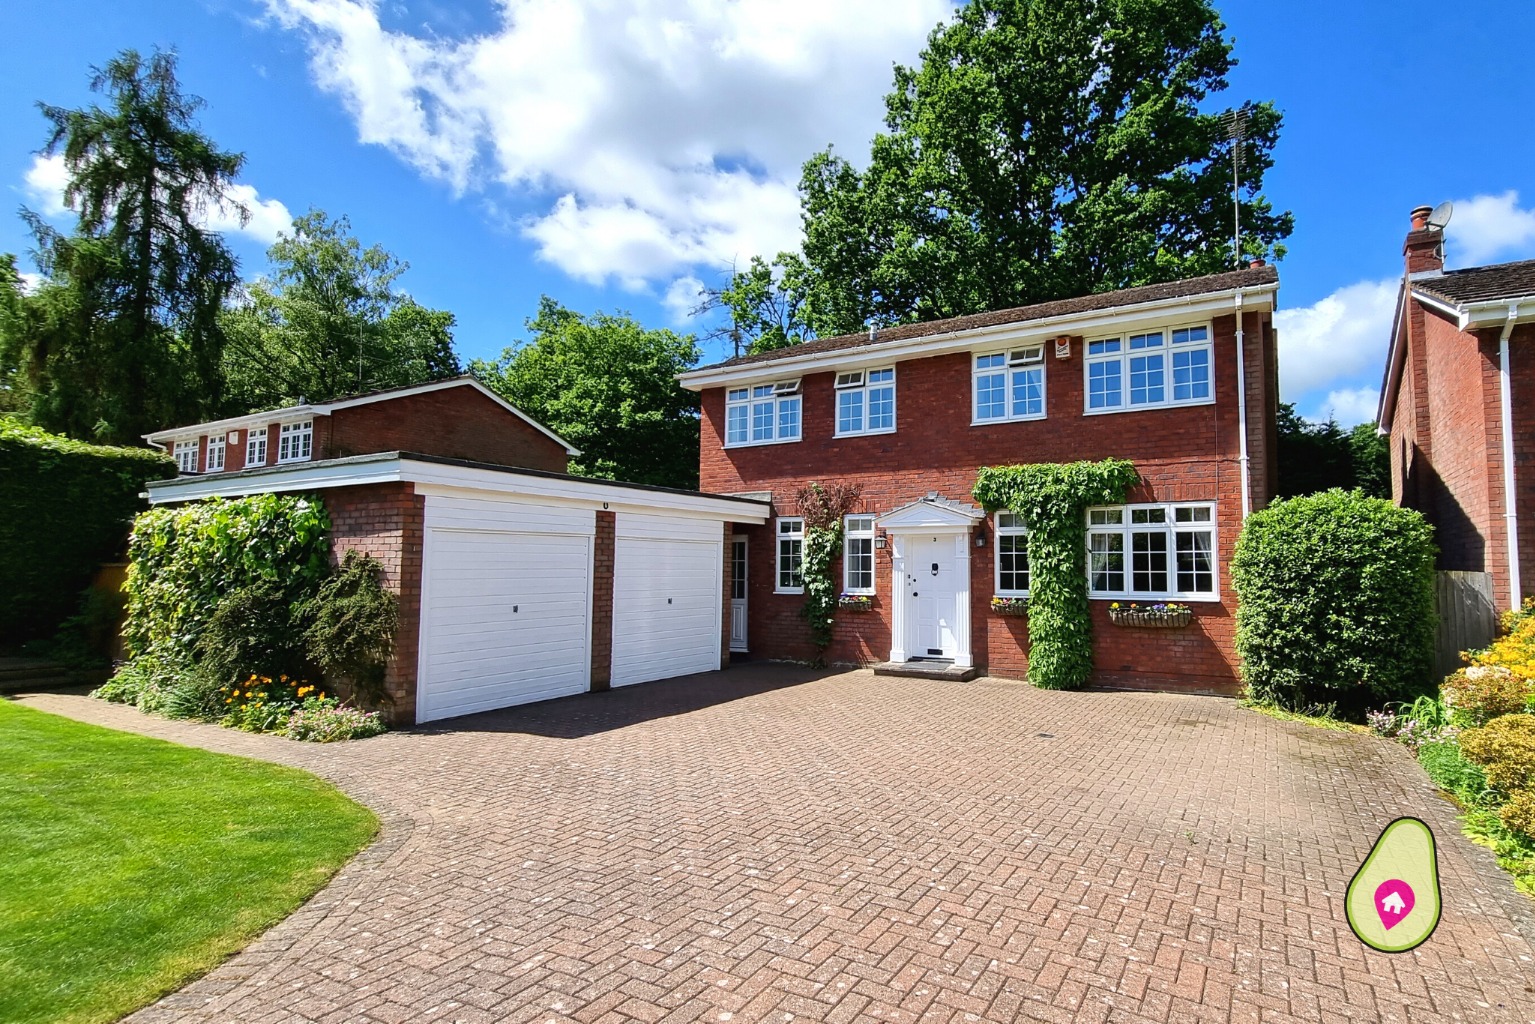 This spacious family home offers ample living accommodation throughout. There is a lovely mature garden and a double garage and driveway parking. We are truly excited to show you details